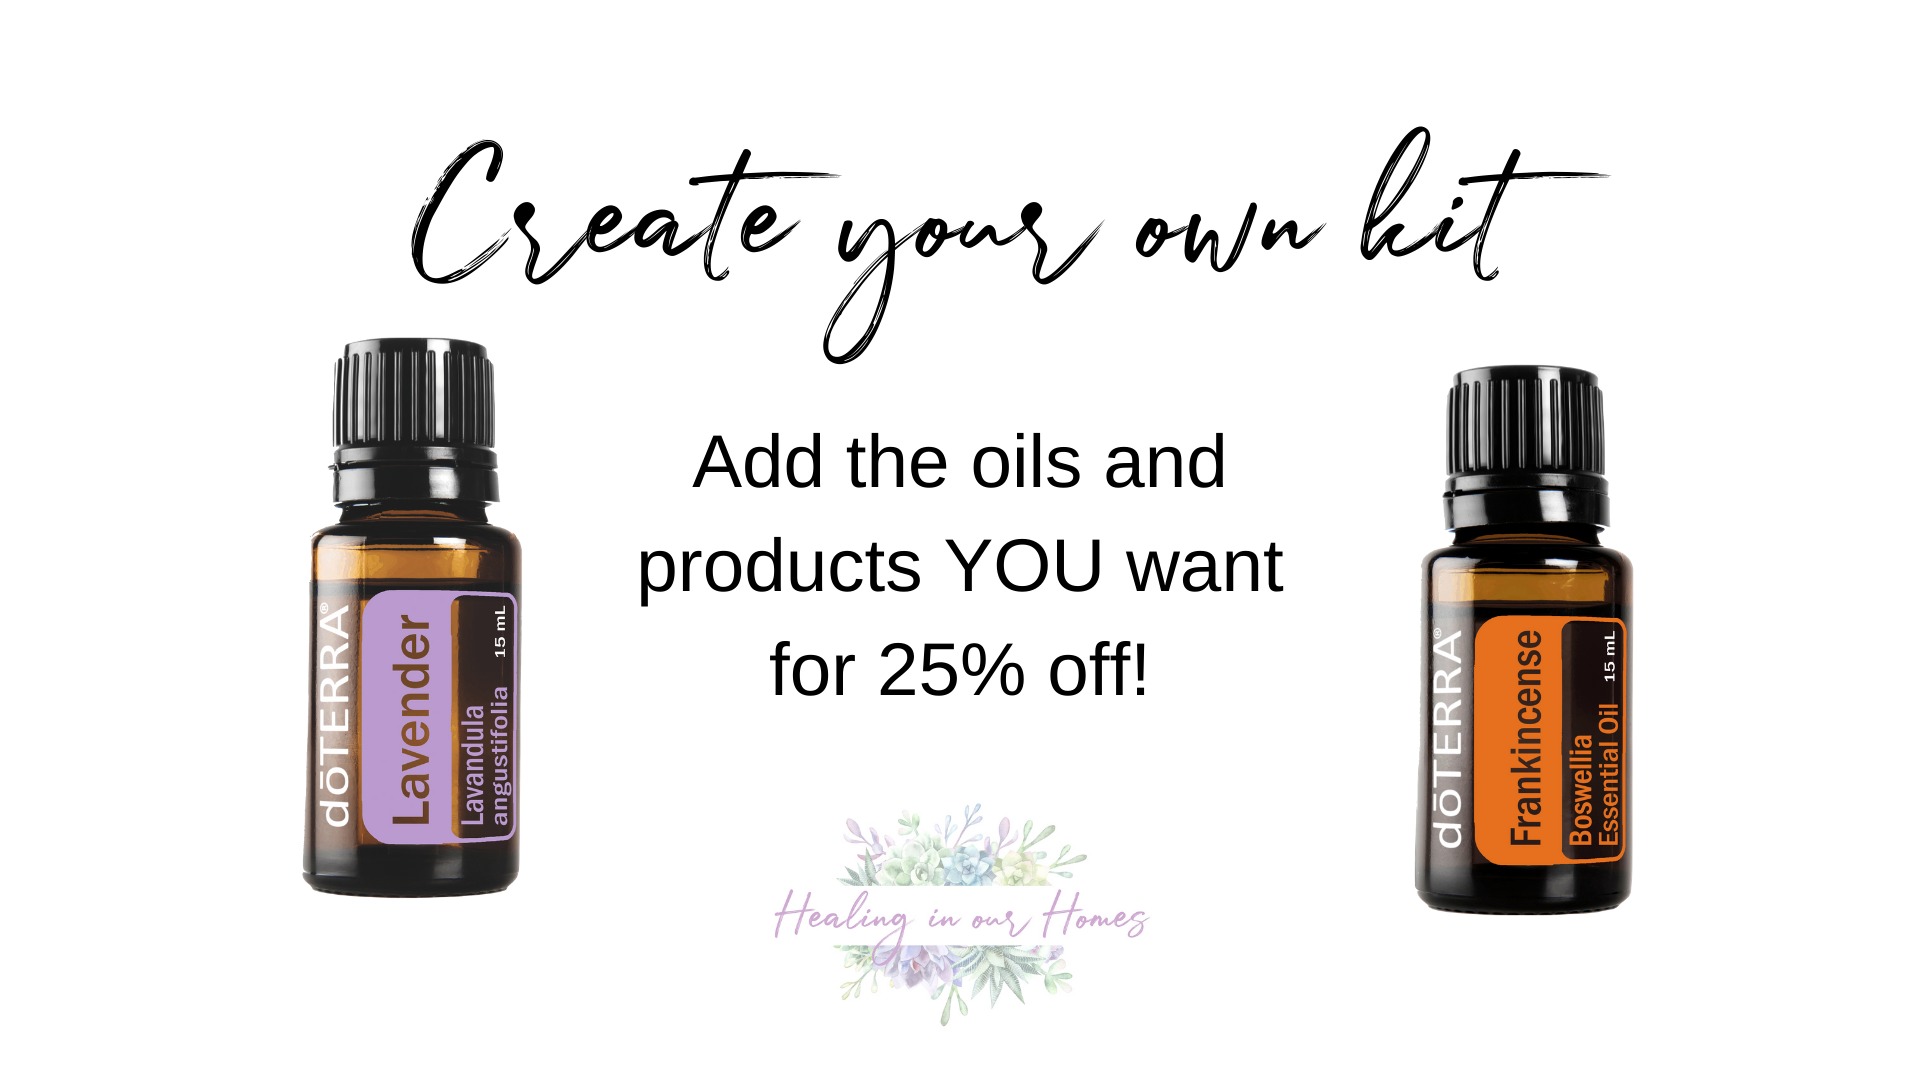 How to buy doterra oils - Healing in Our Homes